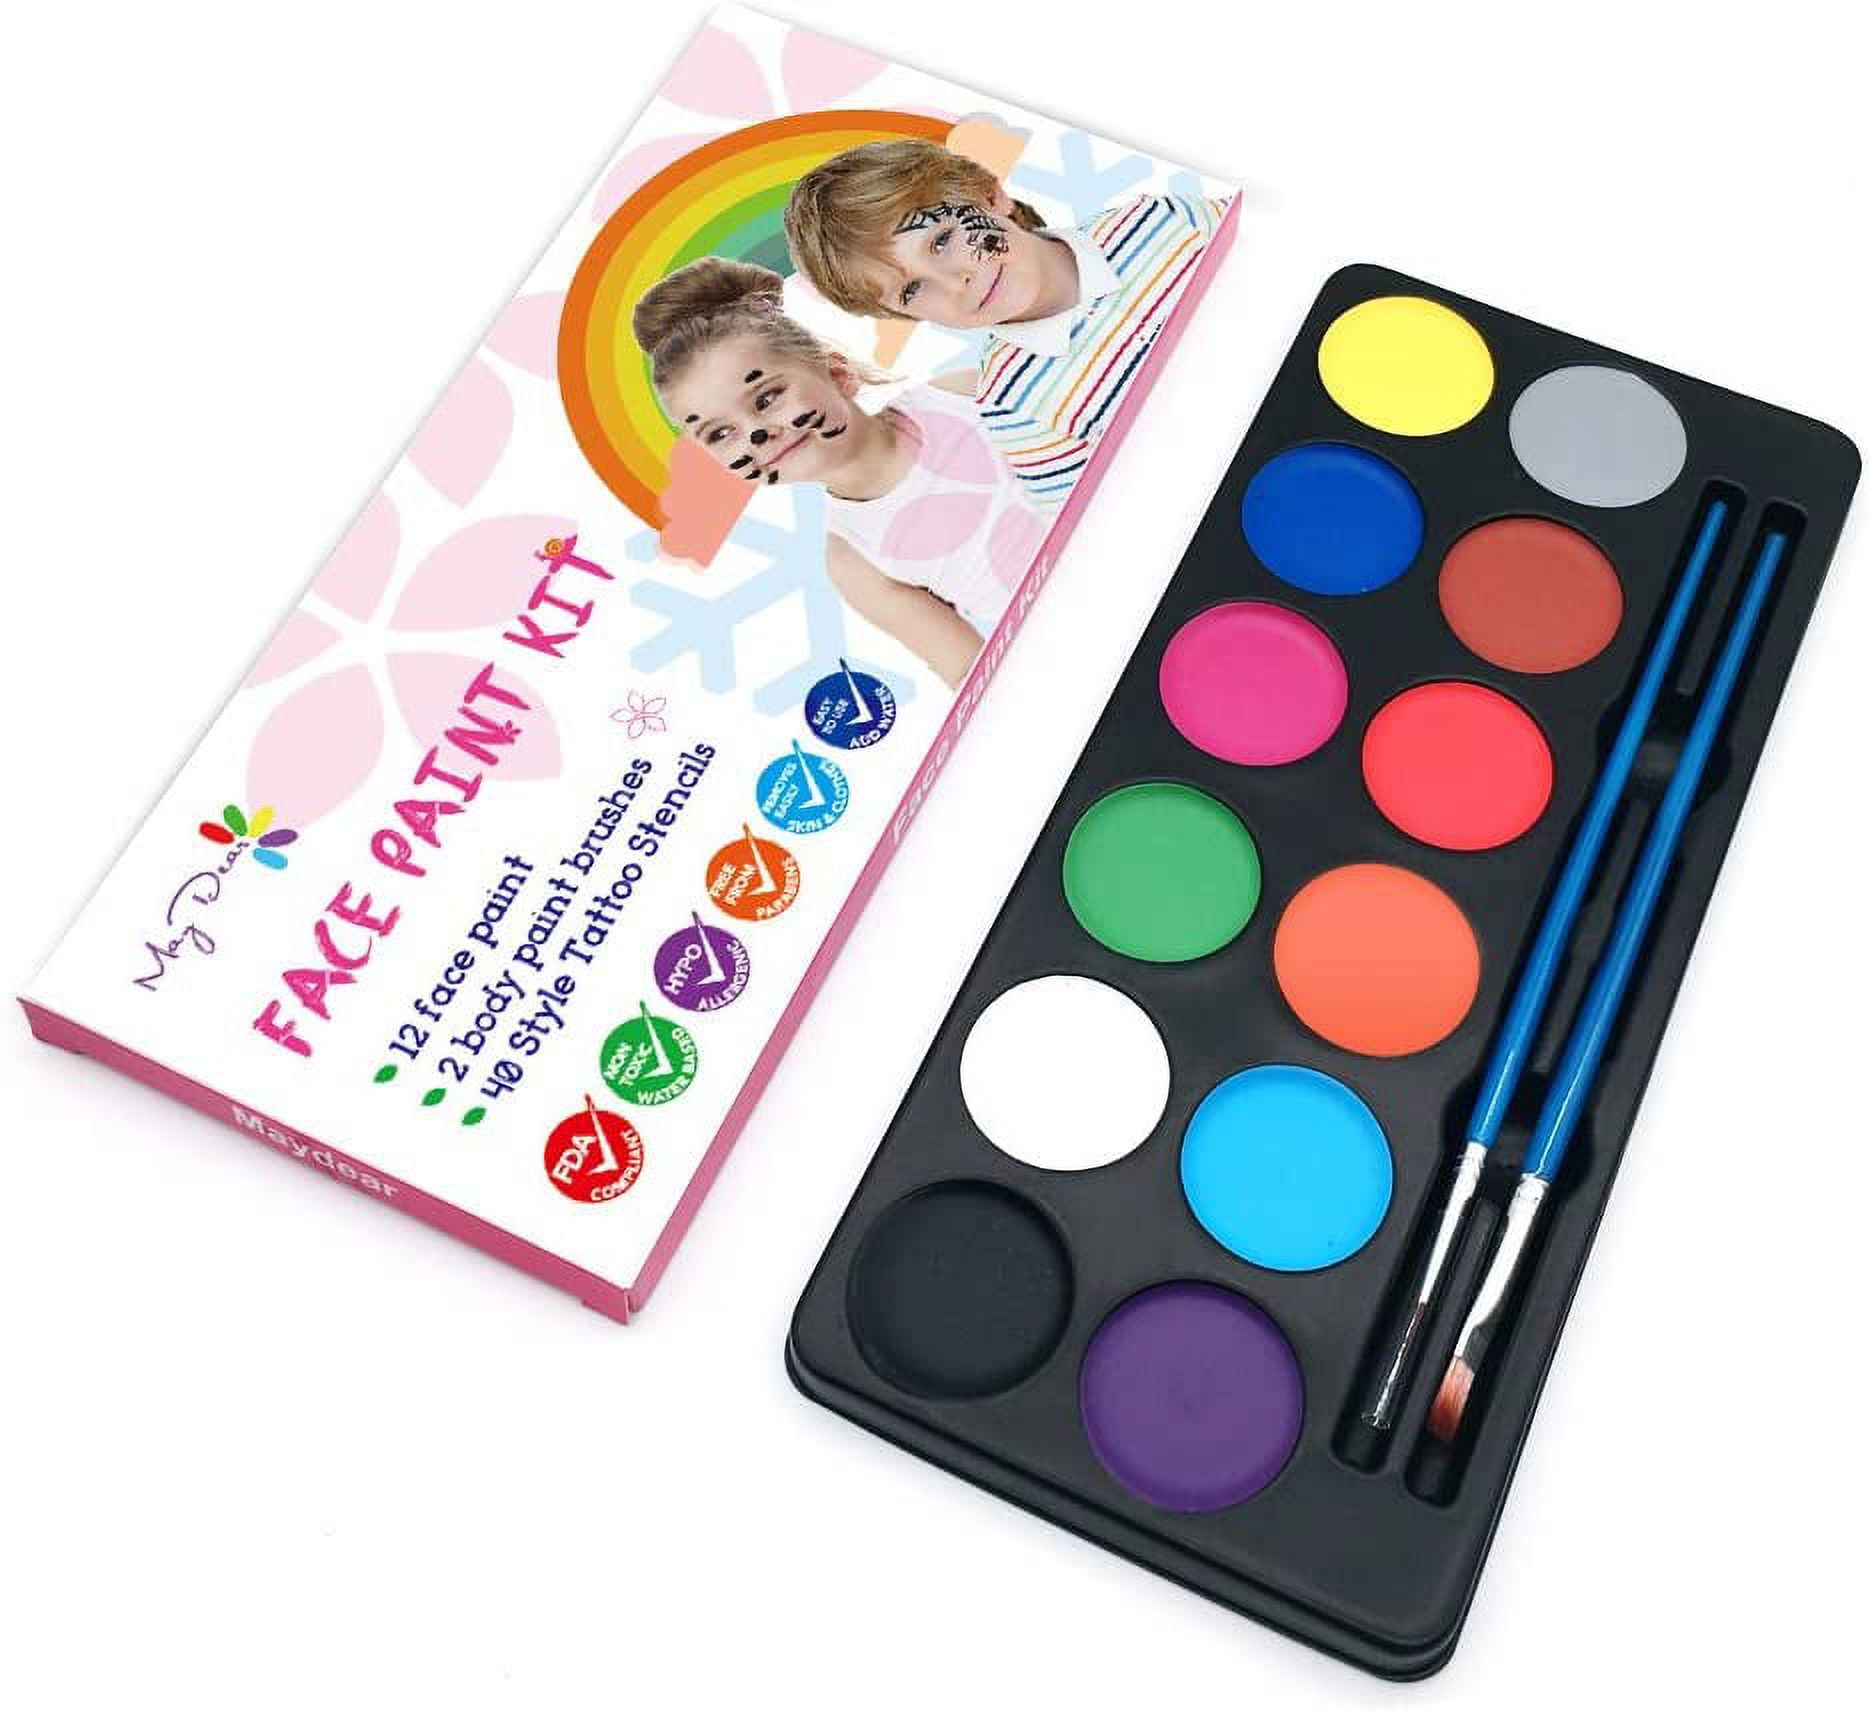  Maydear Oil Based Face Painting Kit for Kids Adults, Face and  Body Paint Kit 16 Colors Non-Toxic Paints Safe for Sensitive Skin,  Professional Face Paint Palette : Automotive